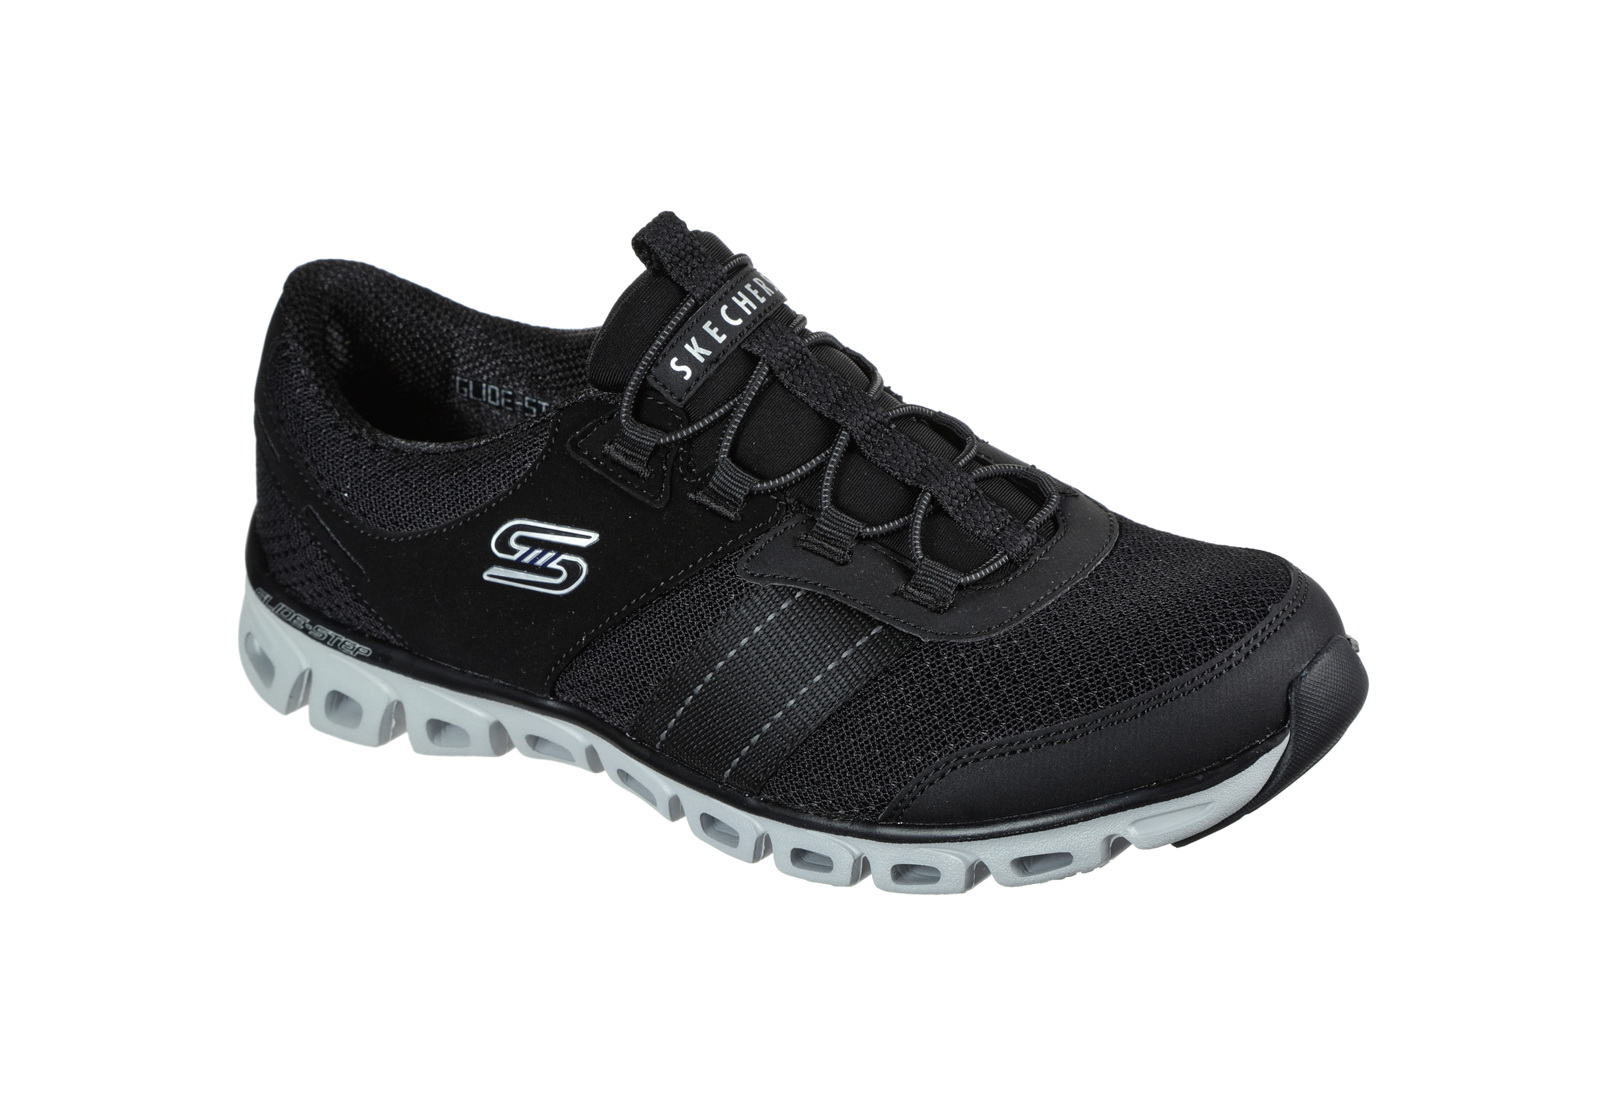 Skechers Slip-on Glide Step - JUSt Be You